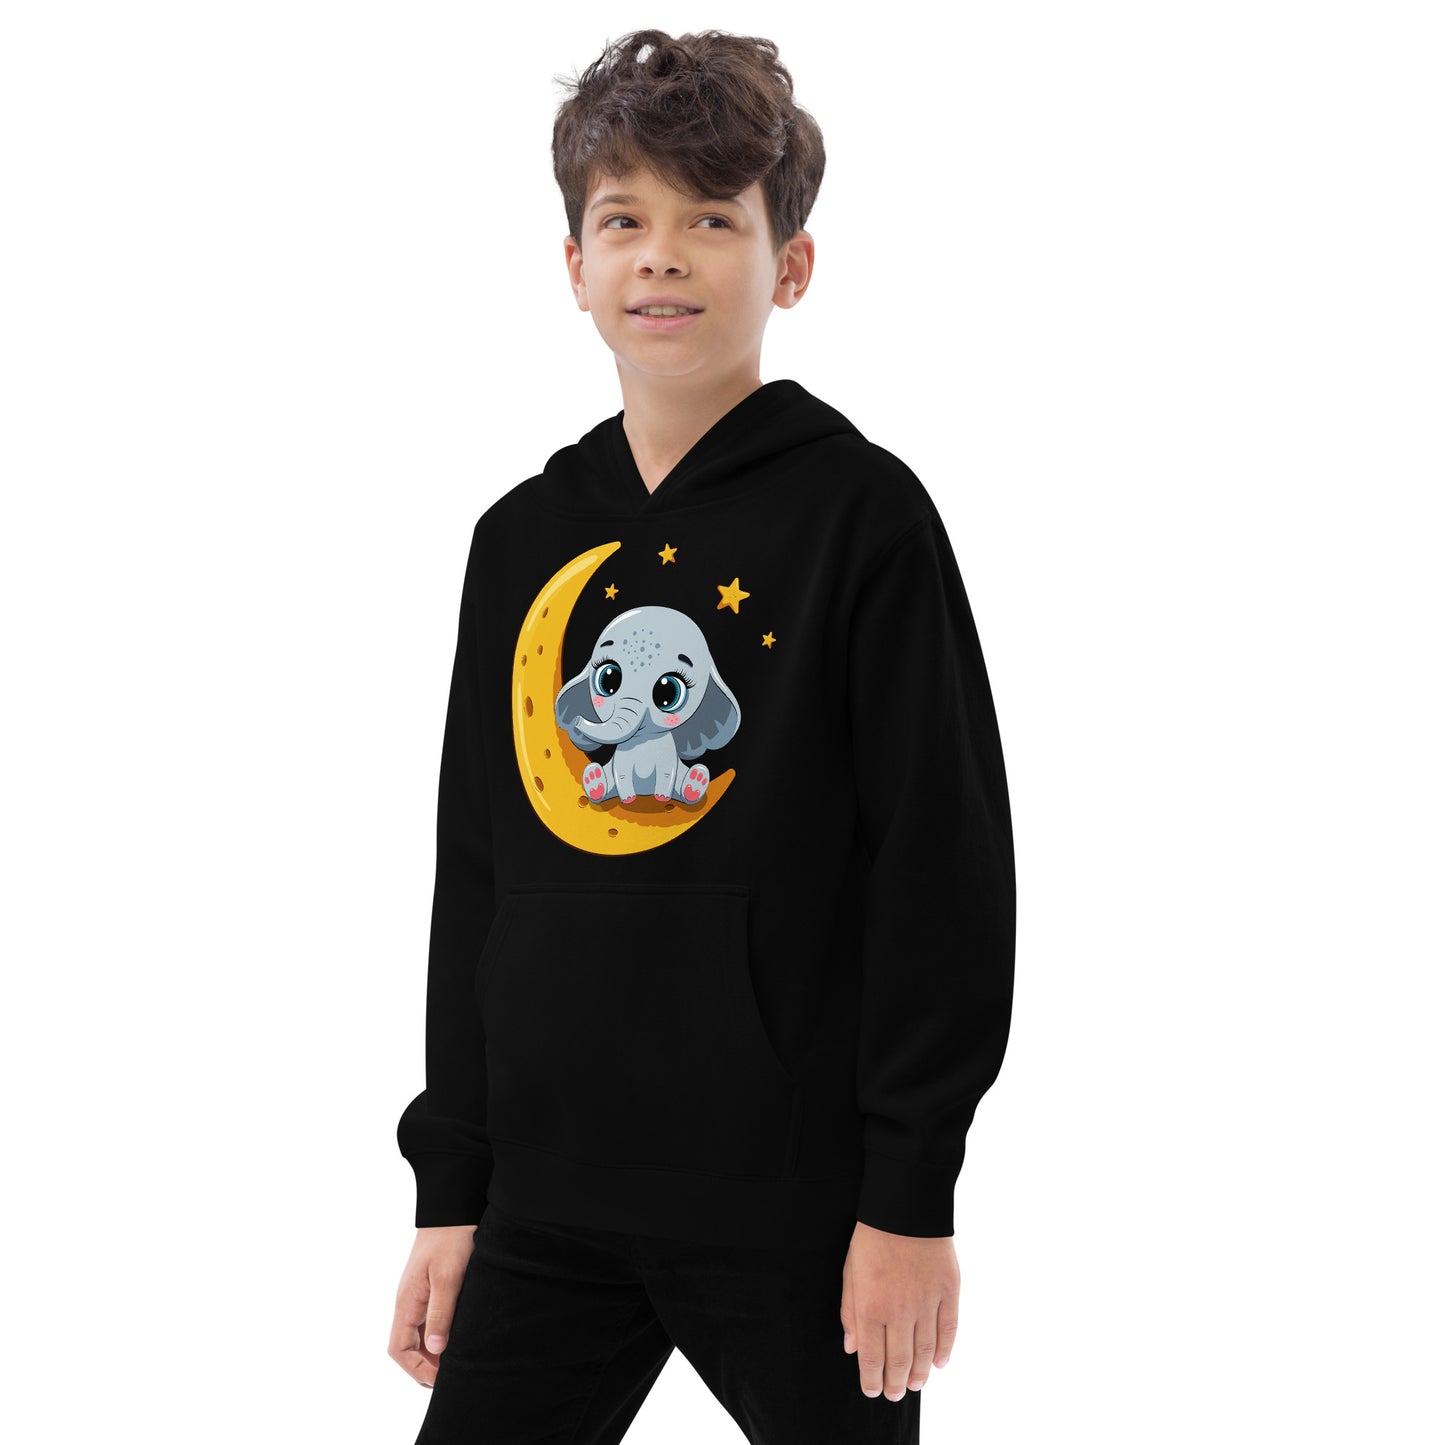 Cute Baby Elephant Sitting on the Moon Hoodie, No. 0085